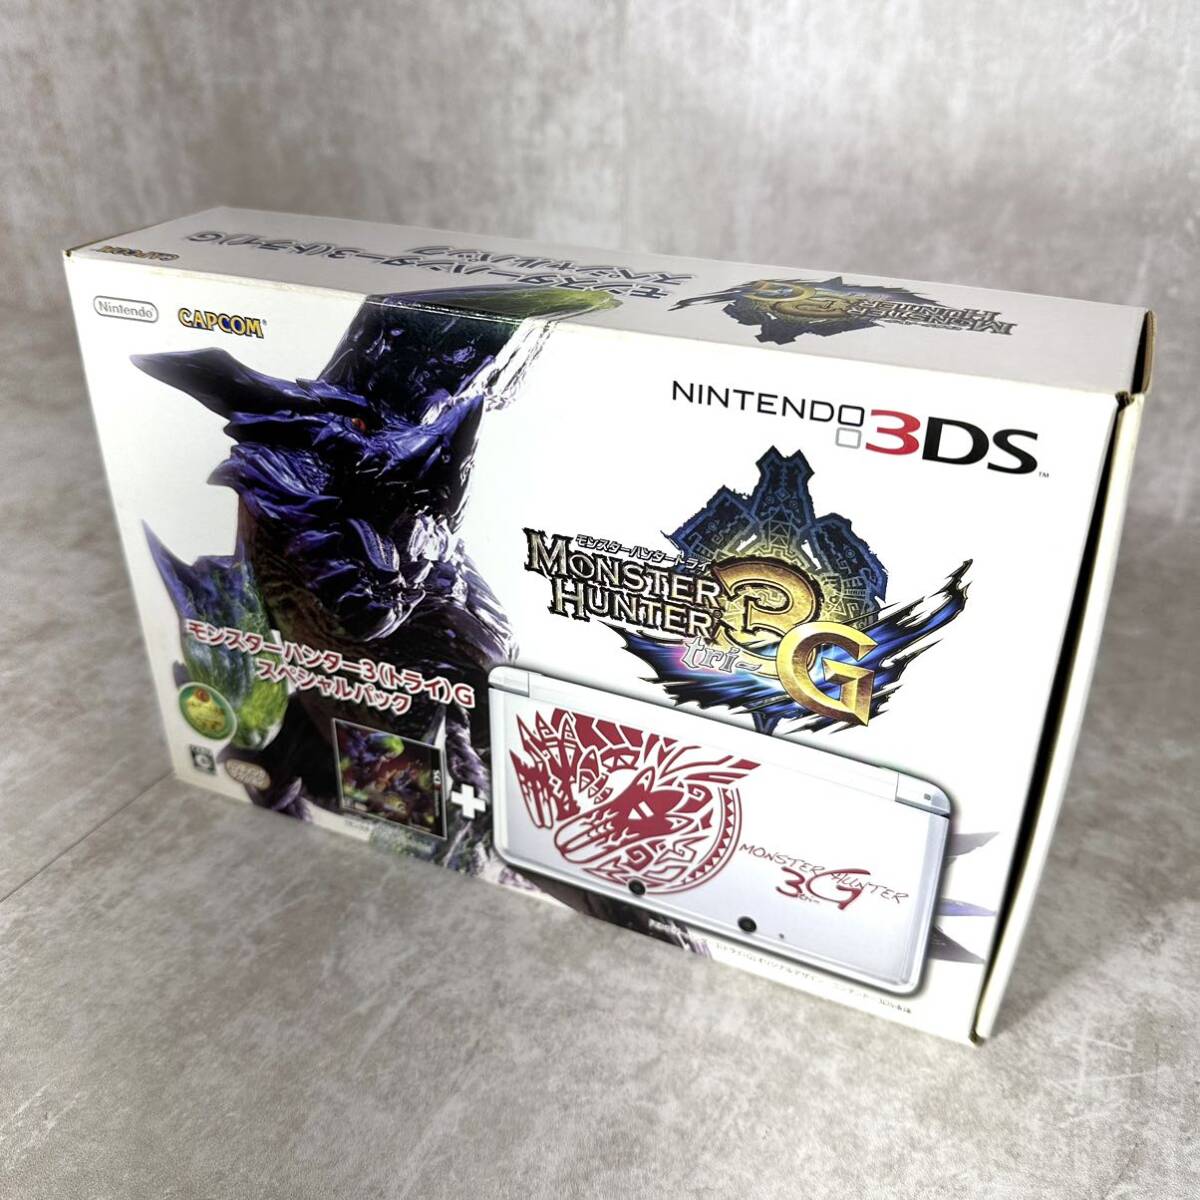 [ free shipping ] nintendo Nintendo 3DS Monstar Hunter 3( Try ) G special pack MONSTER HUNTER3 tri-G 3DS box opinion attaching 